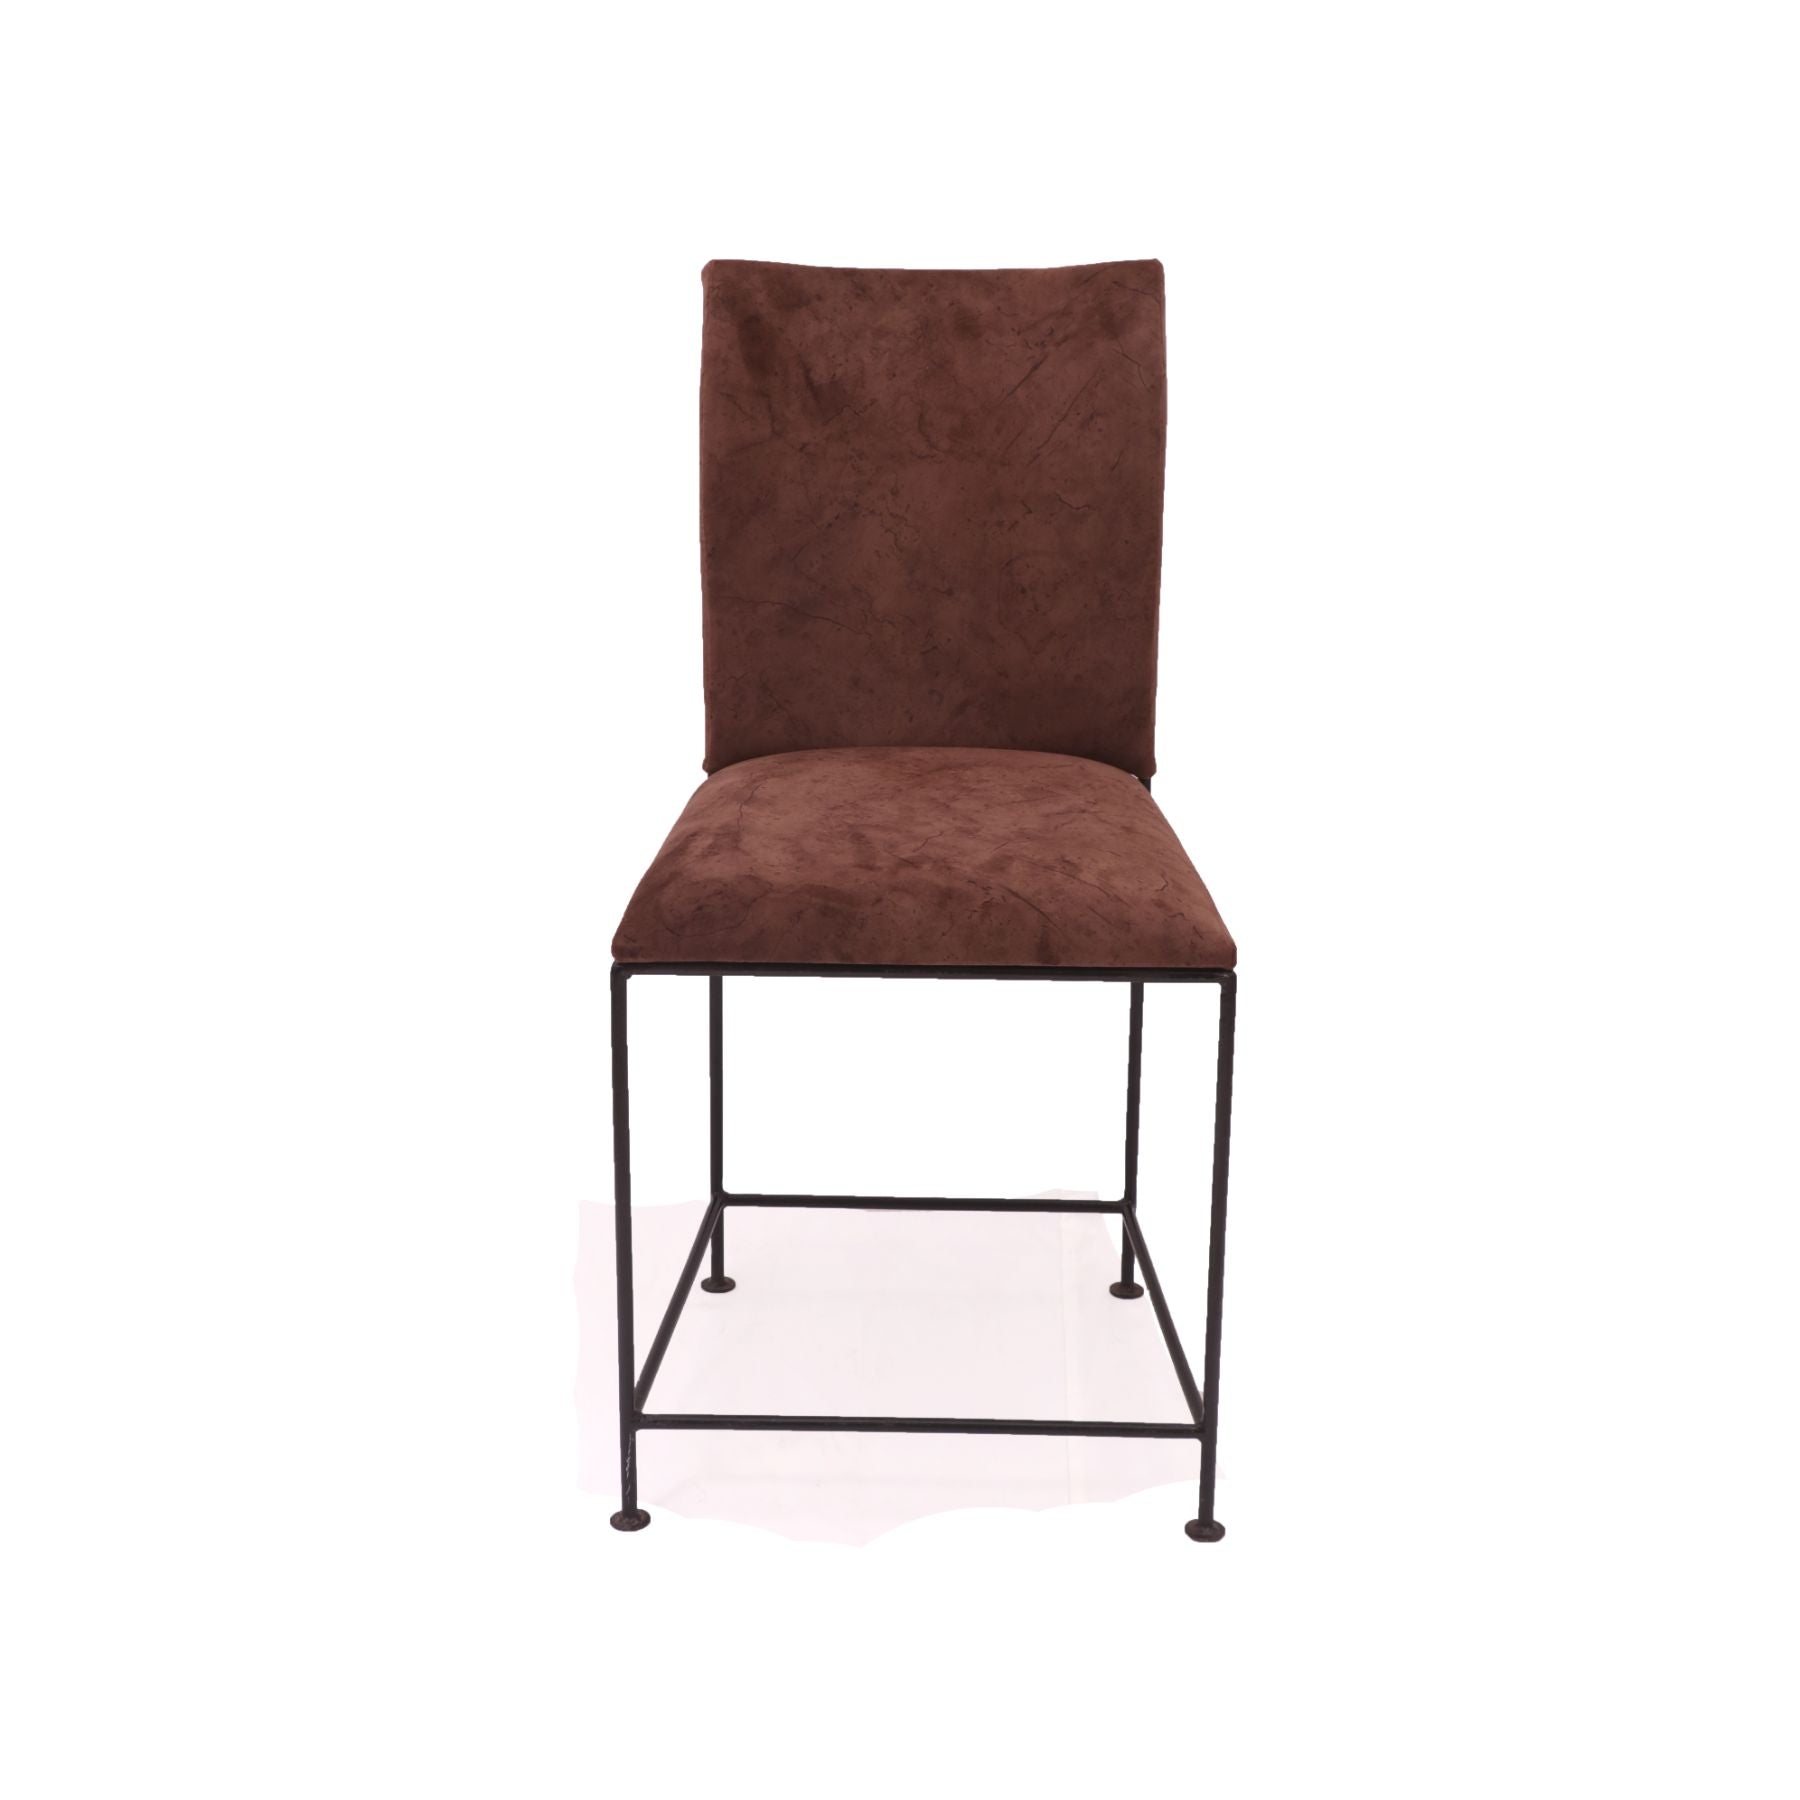 (Set of 2) Handsome Brown Upholstered Chair Dining Chair